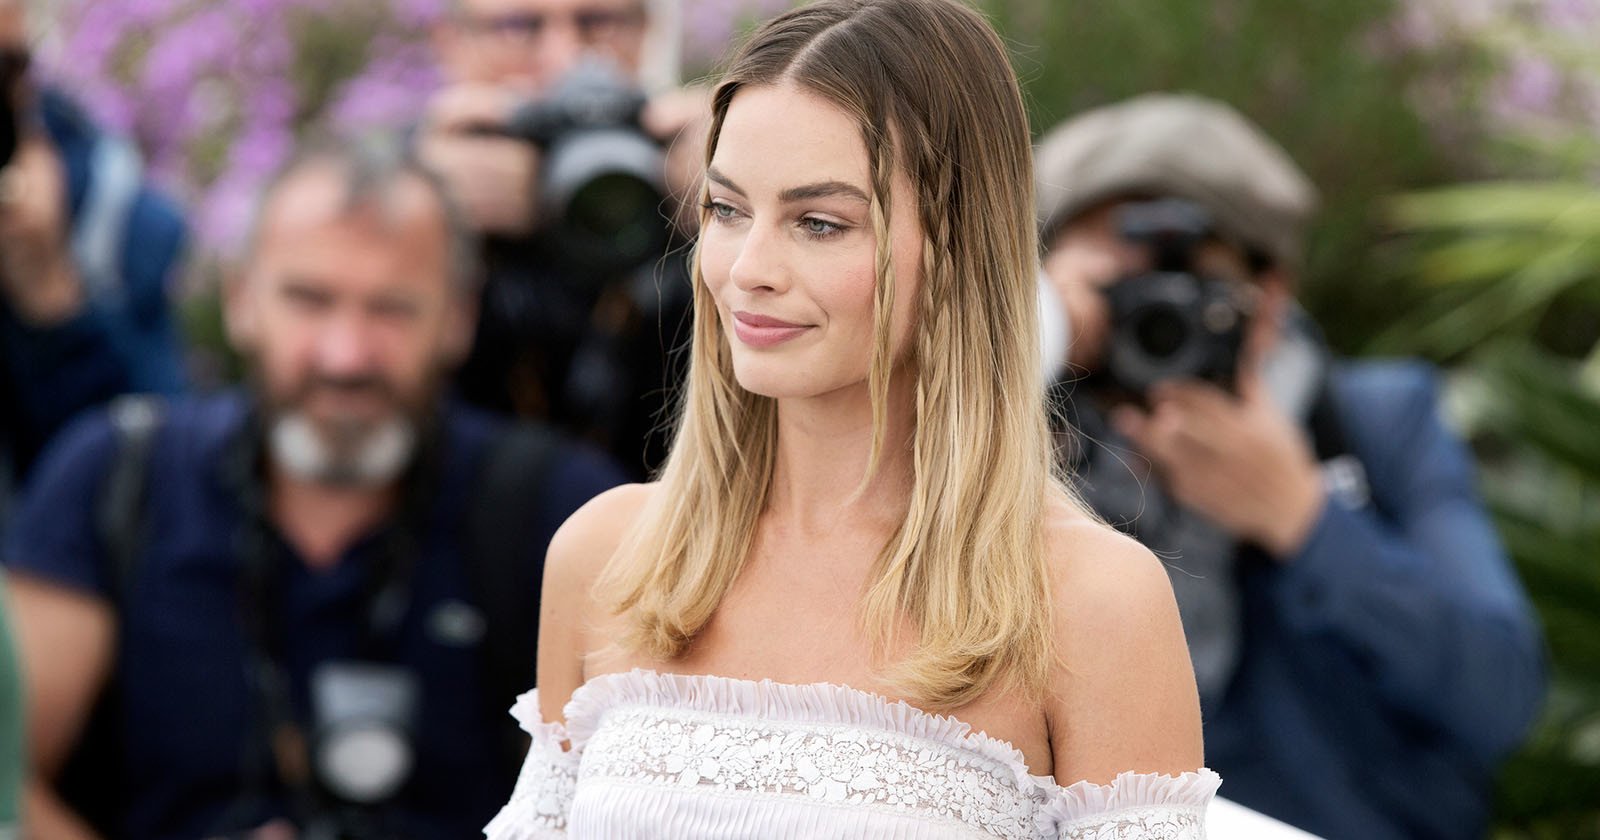 Margot Robbie and Cara Delevingne at the Center of Attack on Photographer